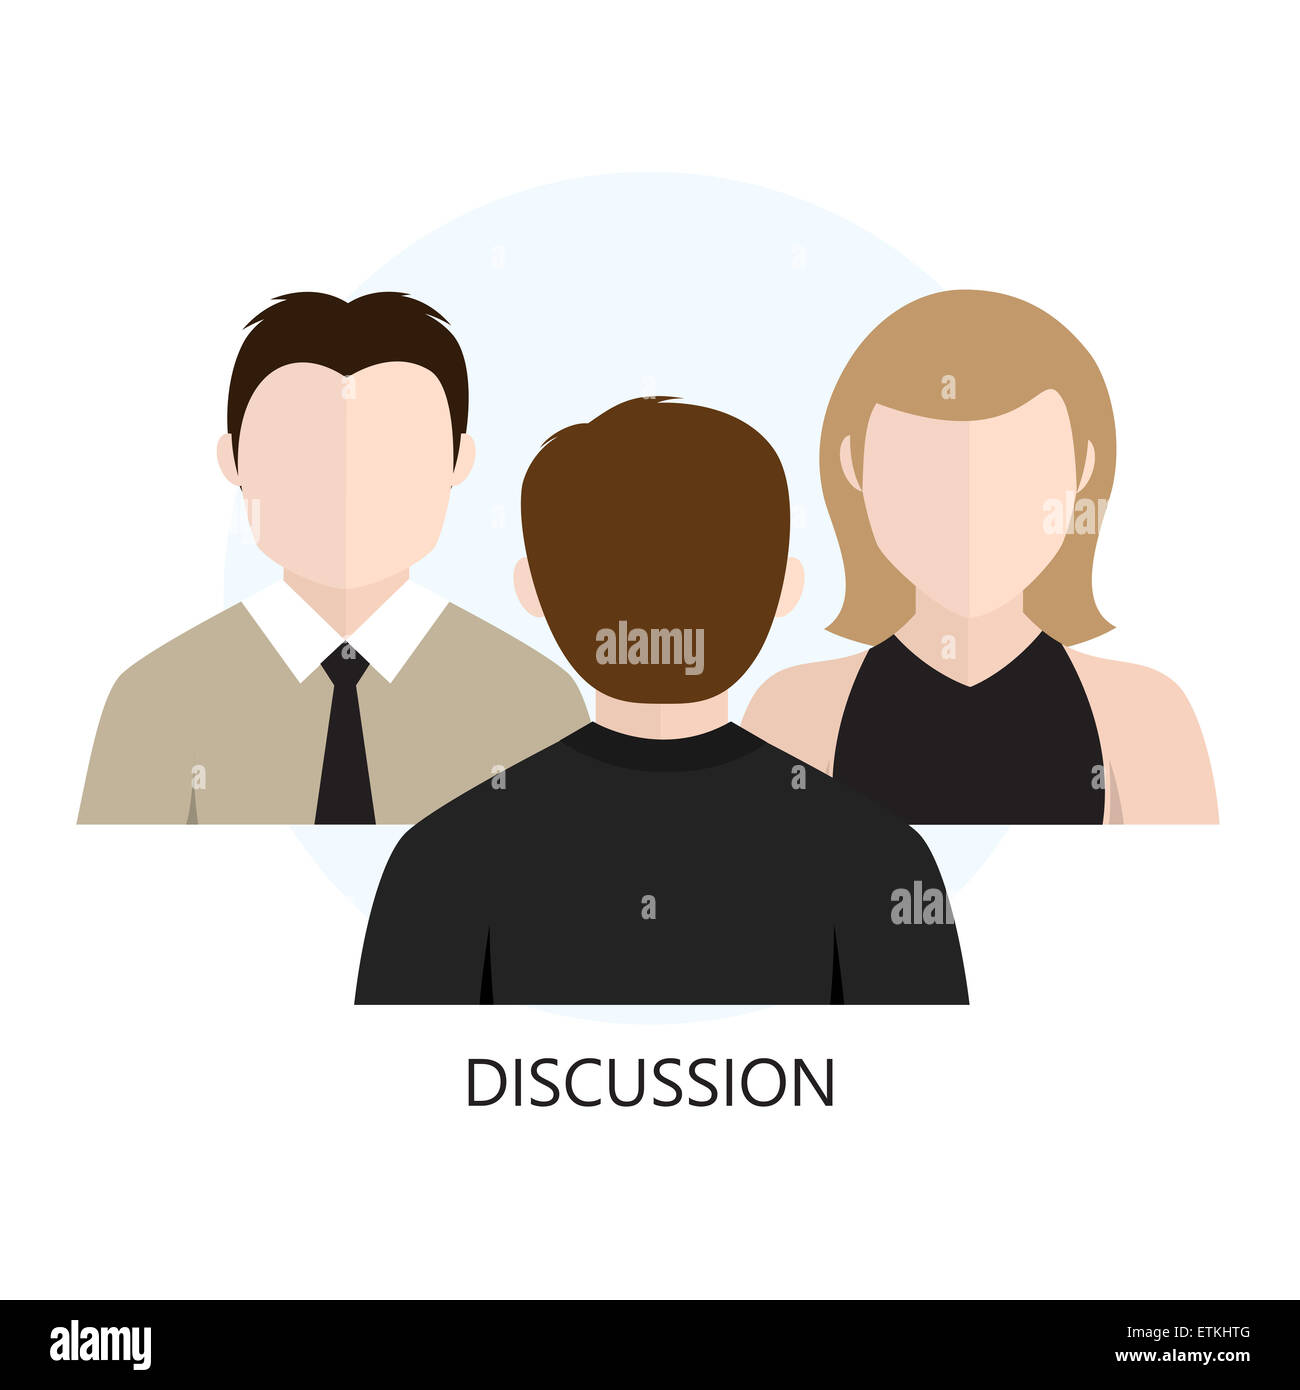 Discussion Icon Flat design  Concept Isolated on White Background Stock Photo